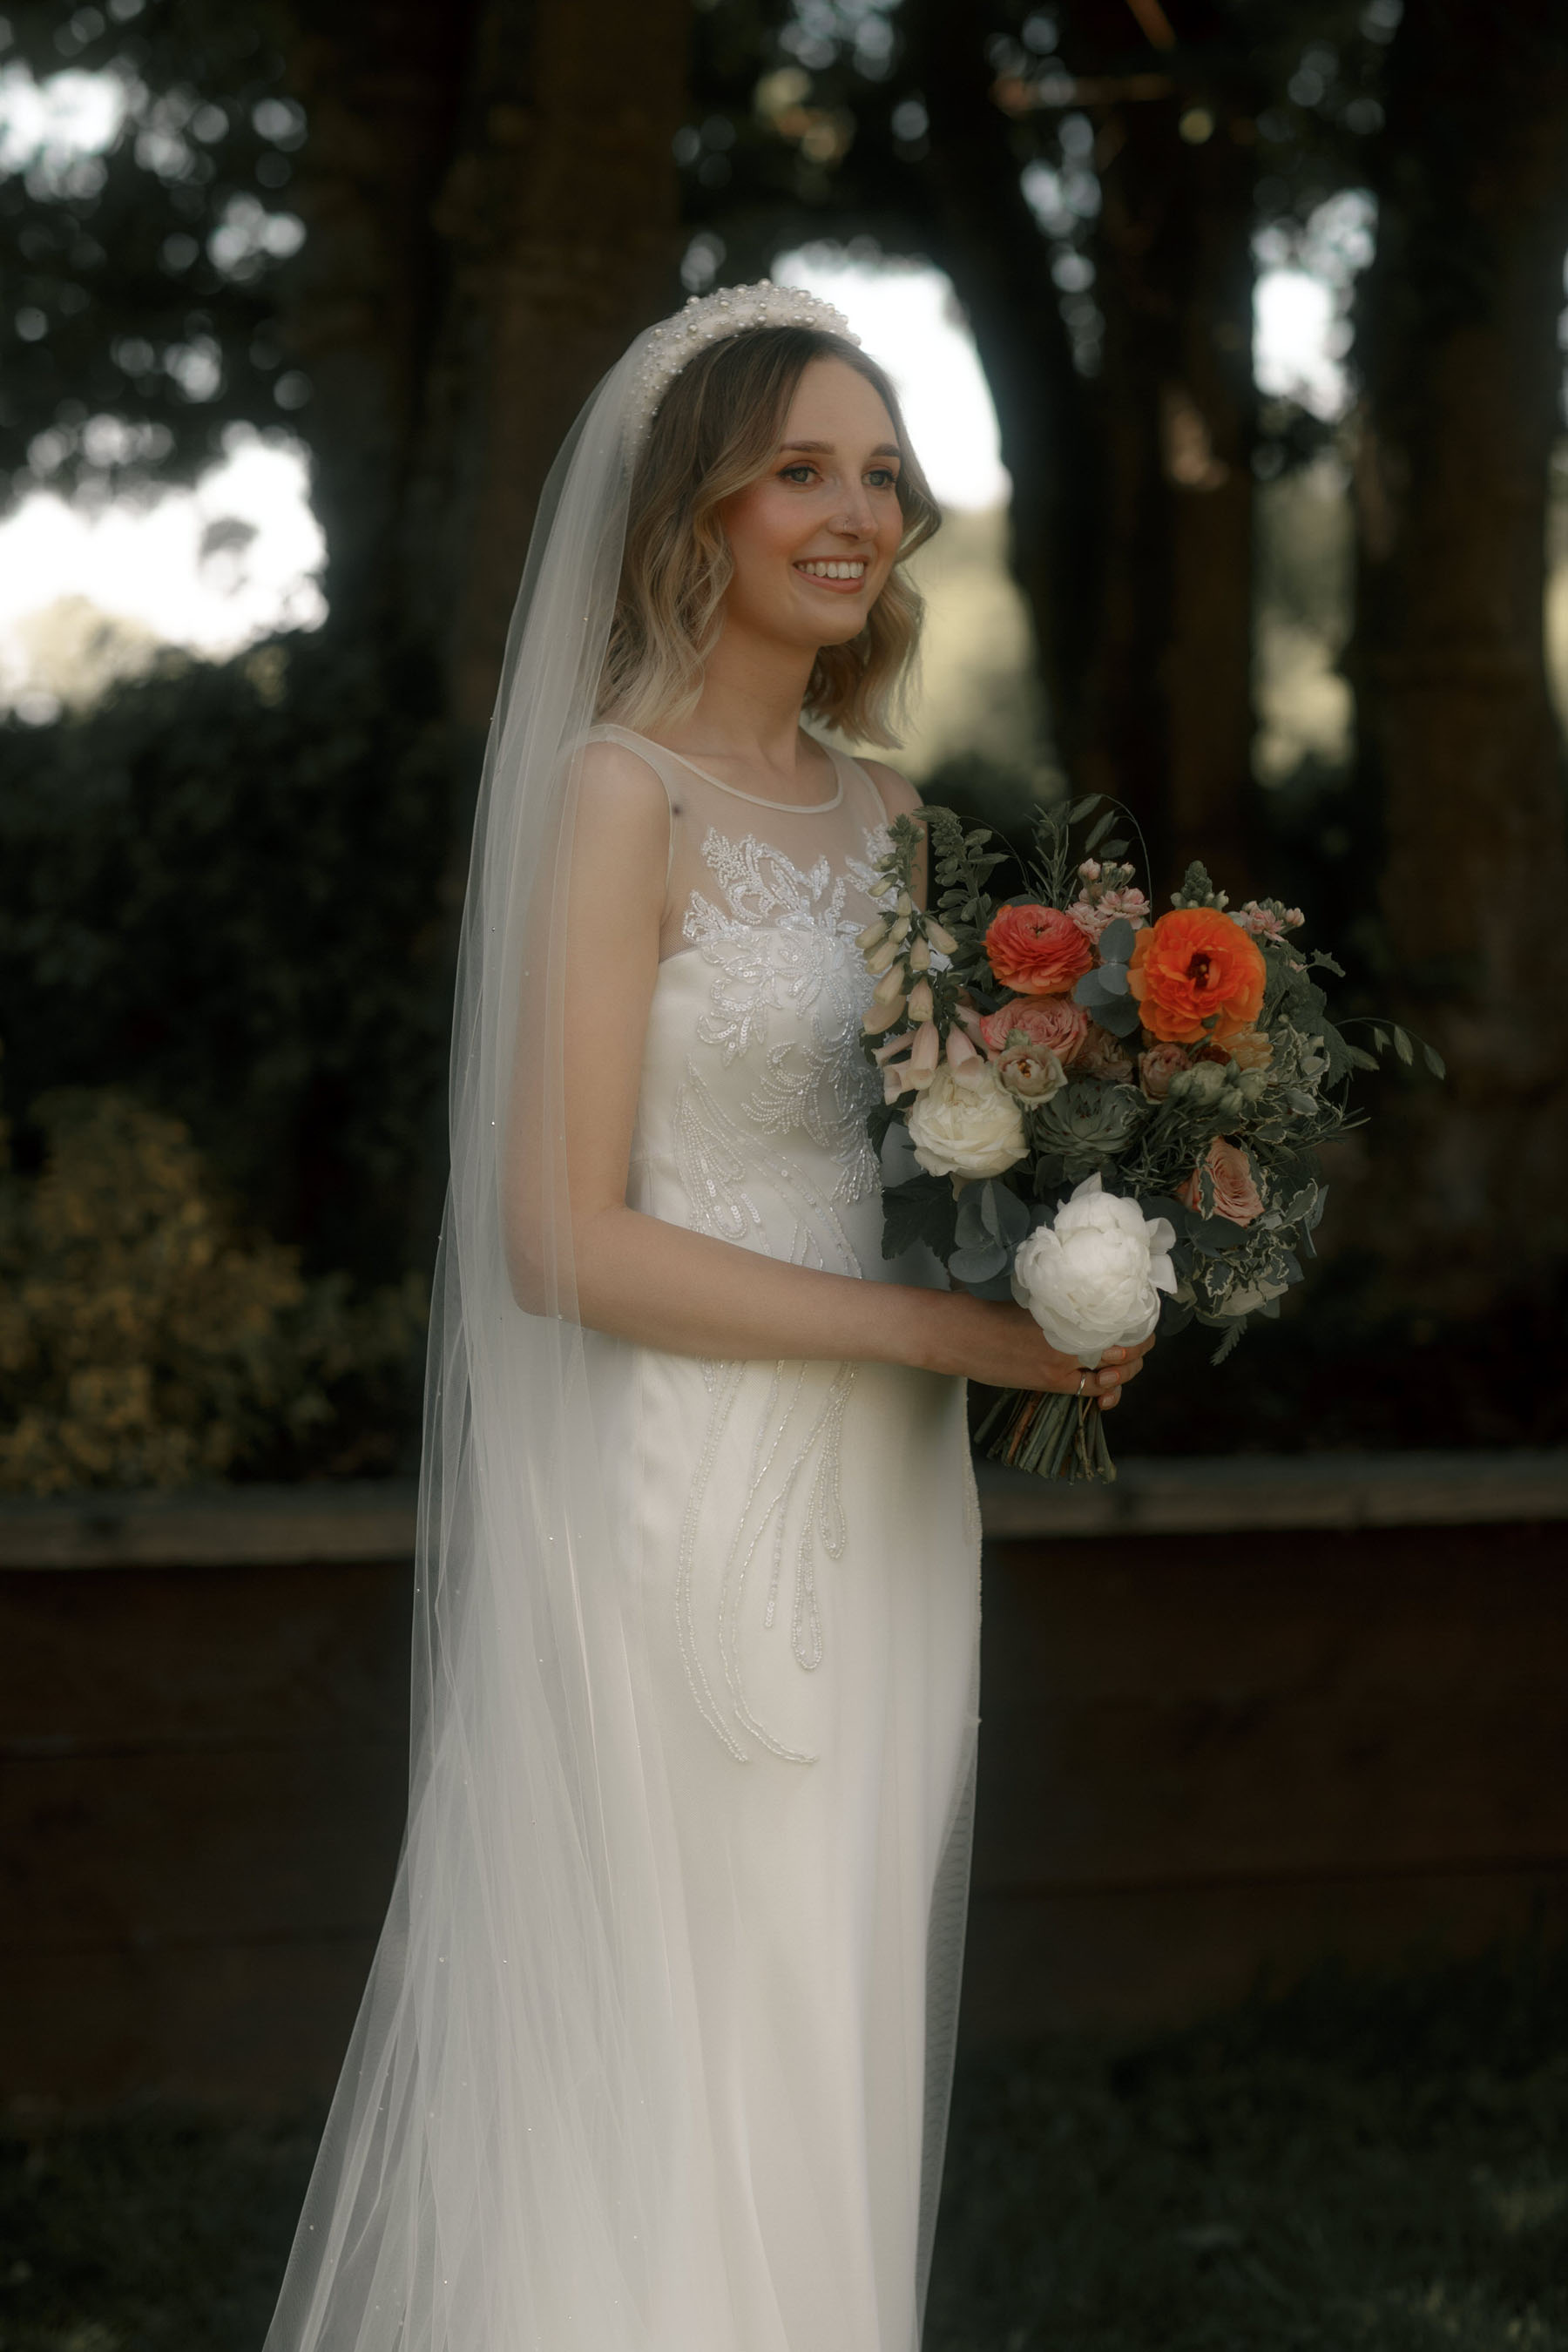 Bride in a Lace & tulle David Fielden wedding dress, a Dolecka eparl headband and long veil. Carrying a white and orange bridal bouquet.